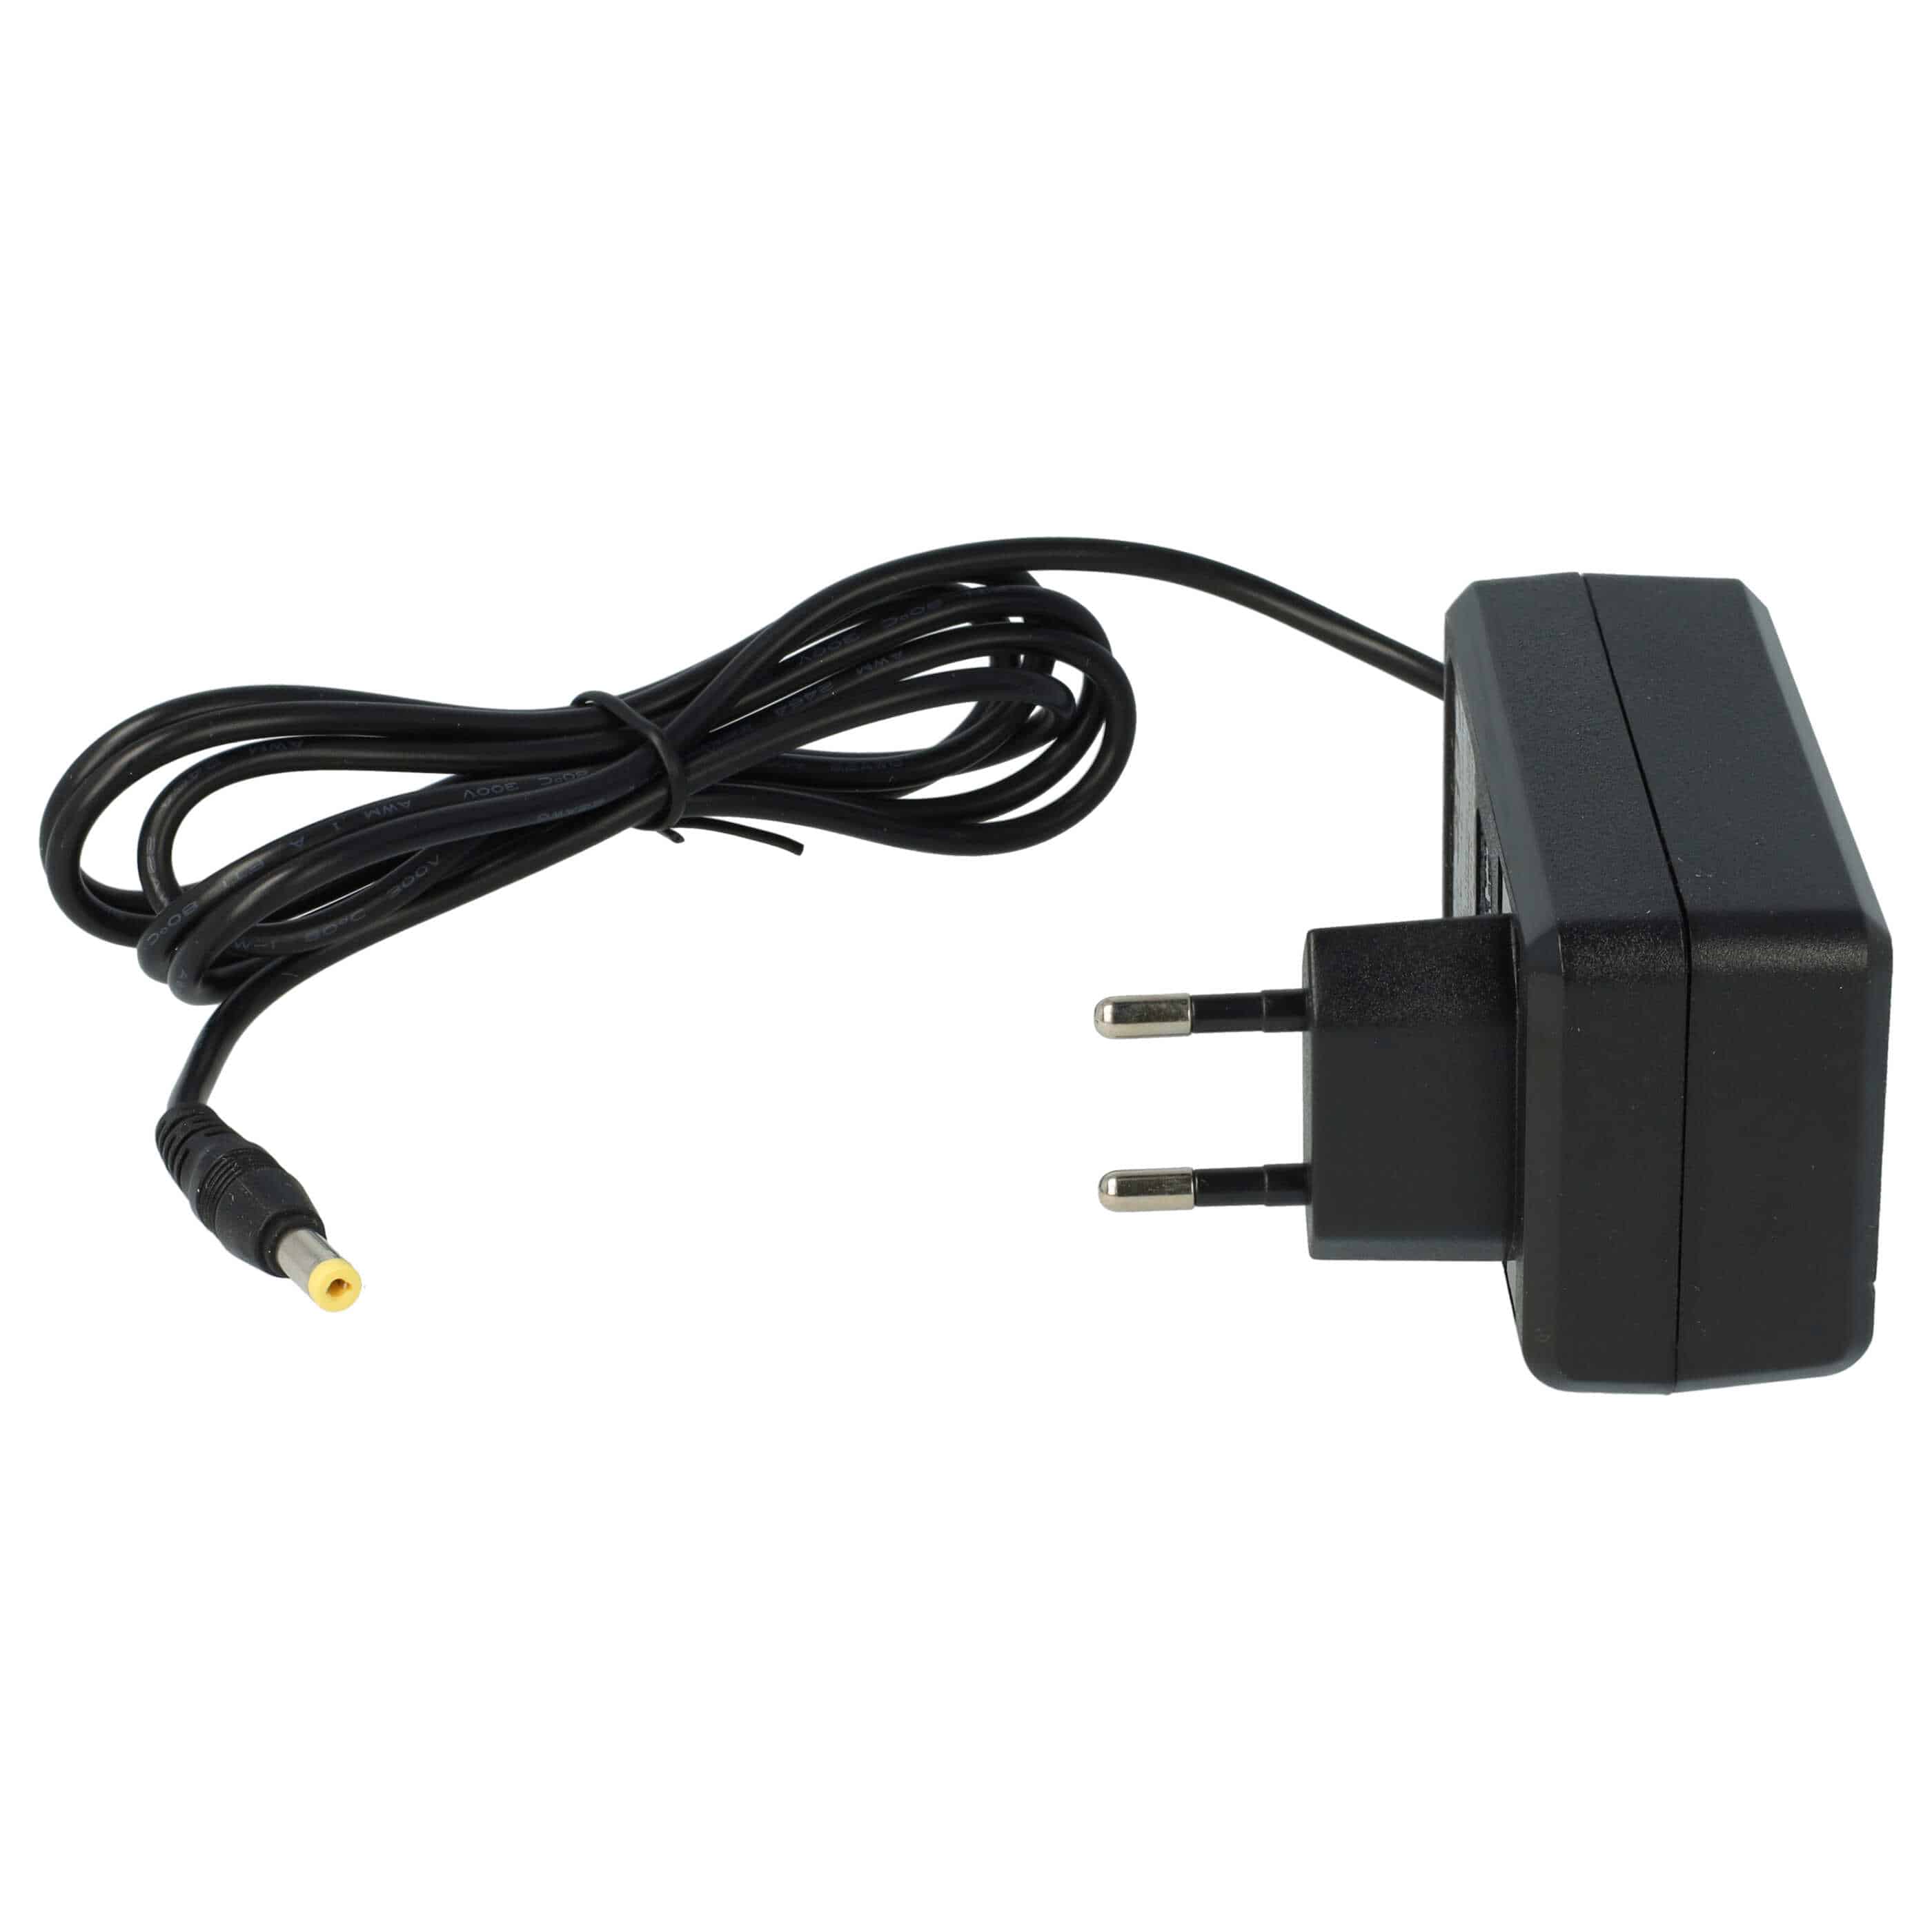 Mains Power Adapter replaces Cisco ENG 3A-152VVT15 for Cisco router - 140 cm